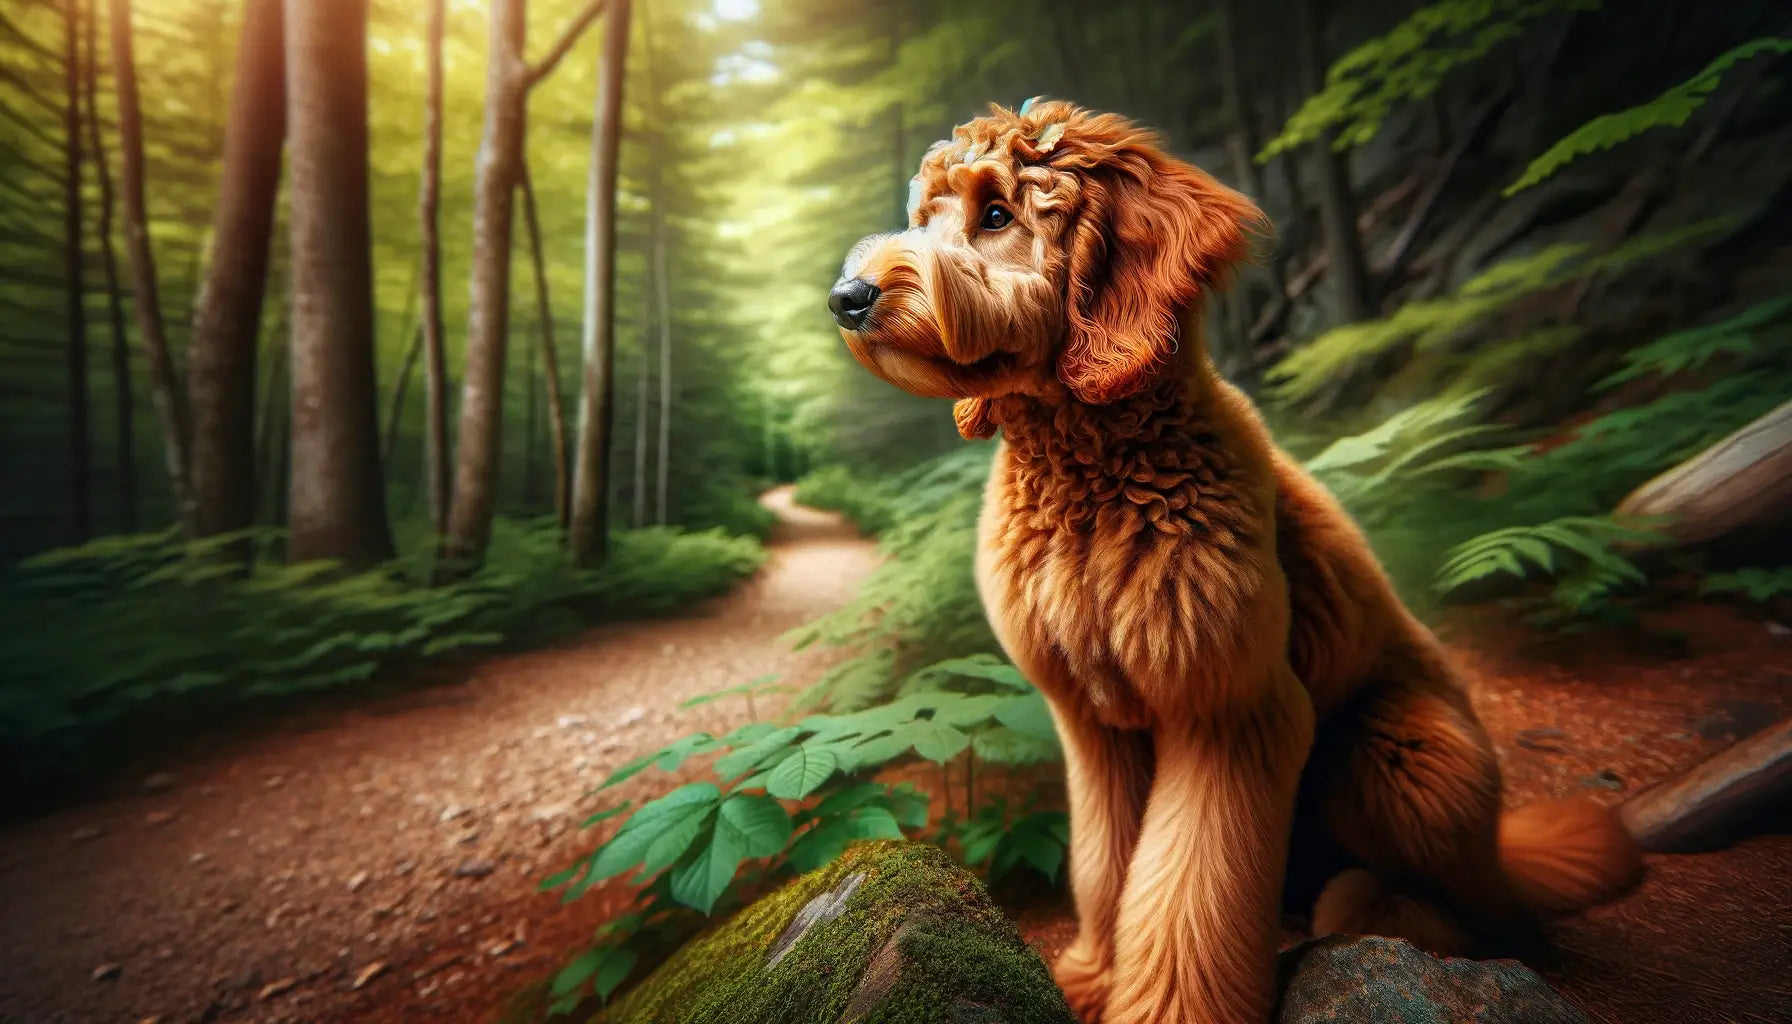 A Red Goldendoodle on a nature trail with its posture alert and ears perked, ready for adventure.